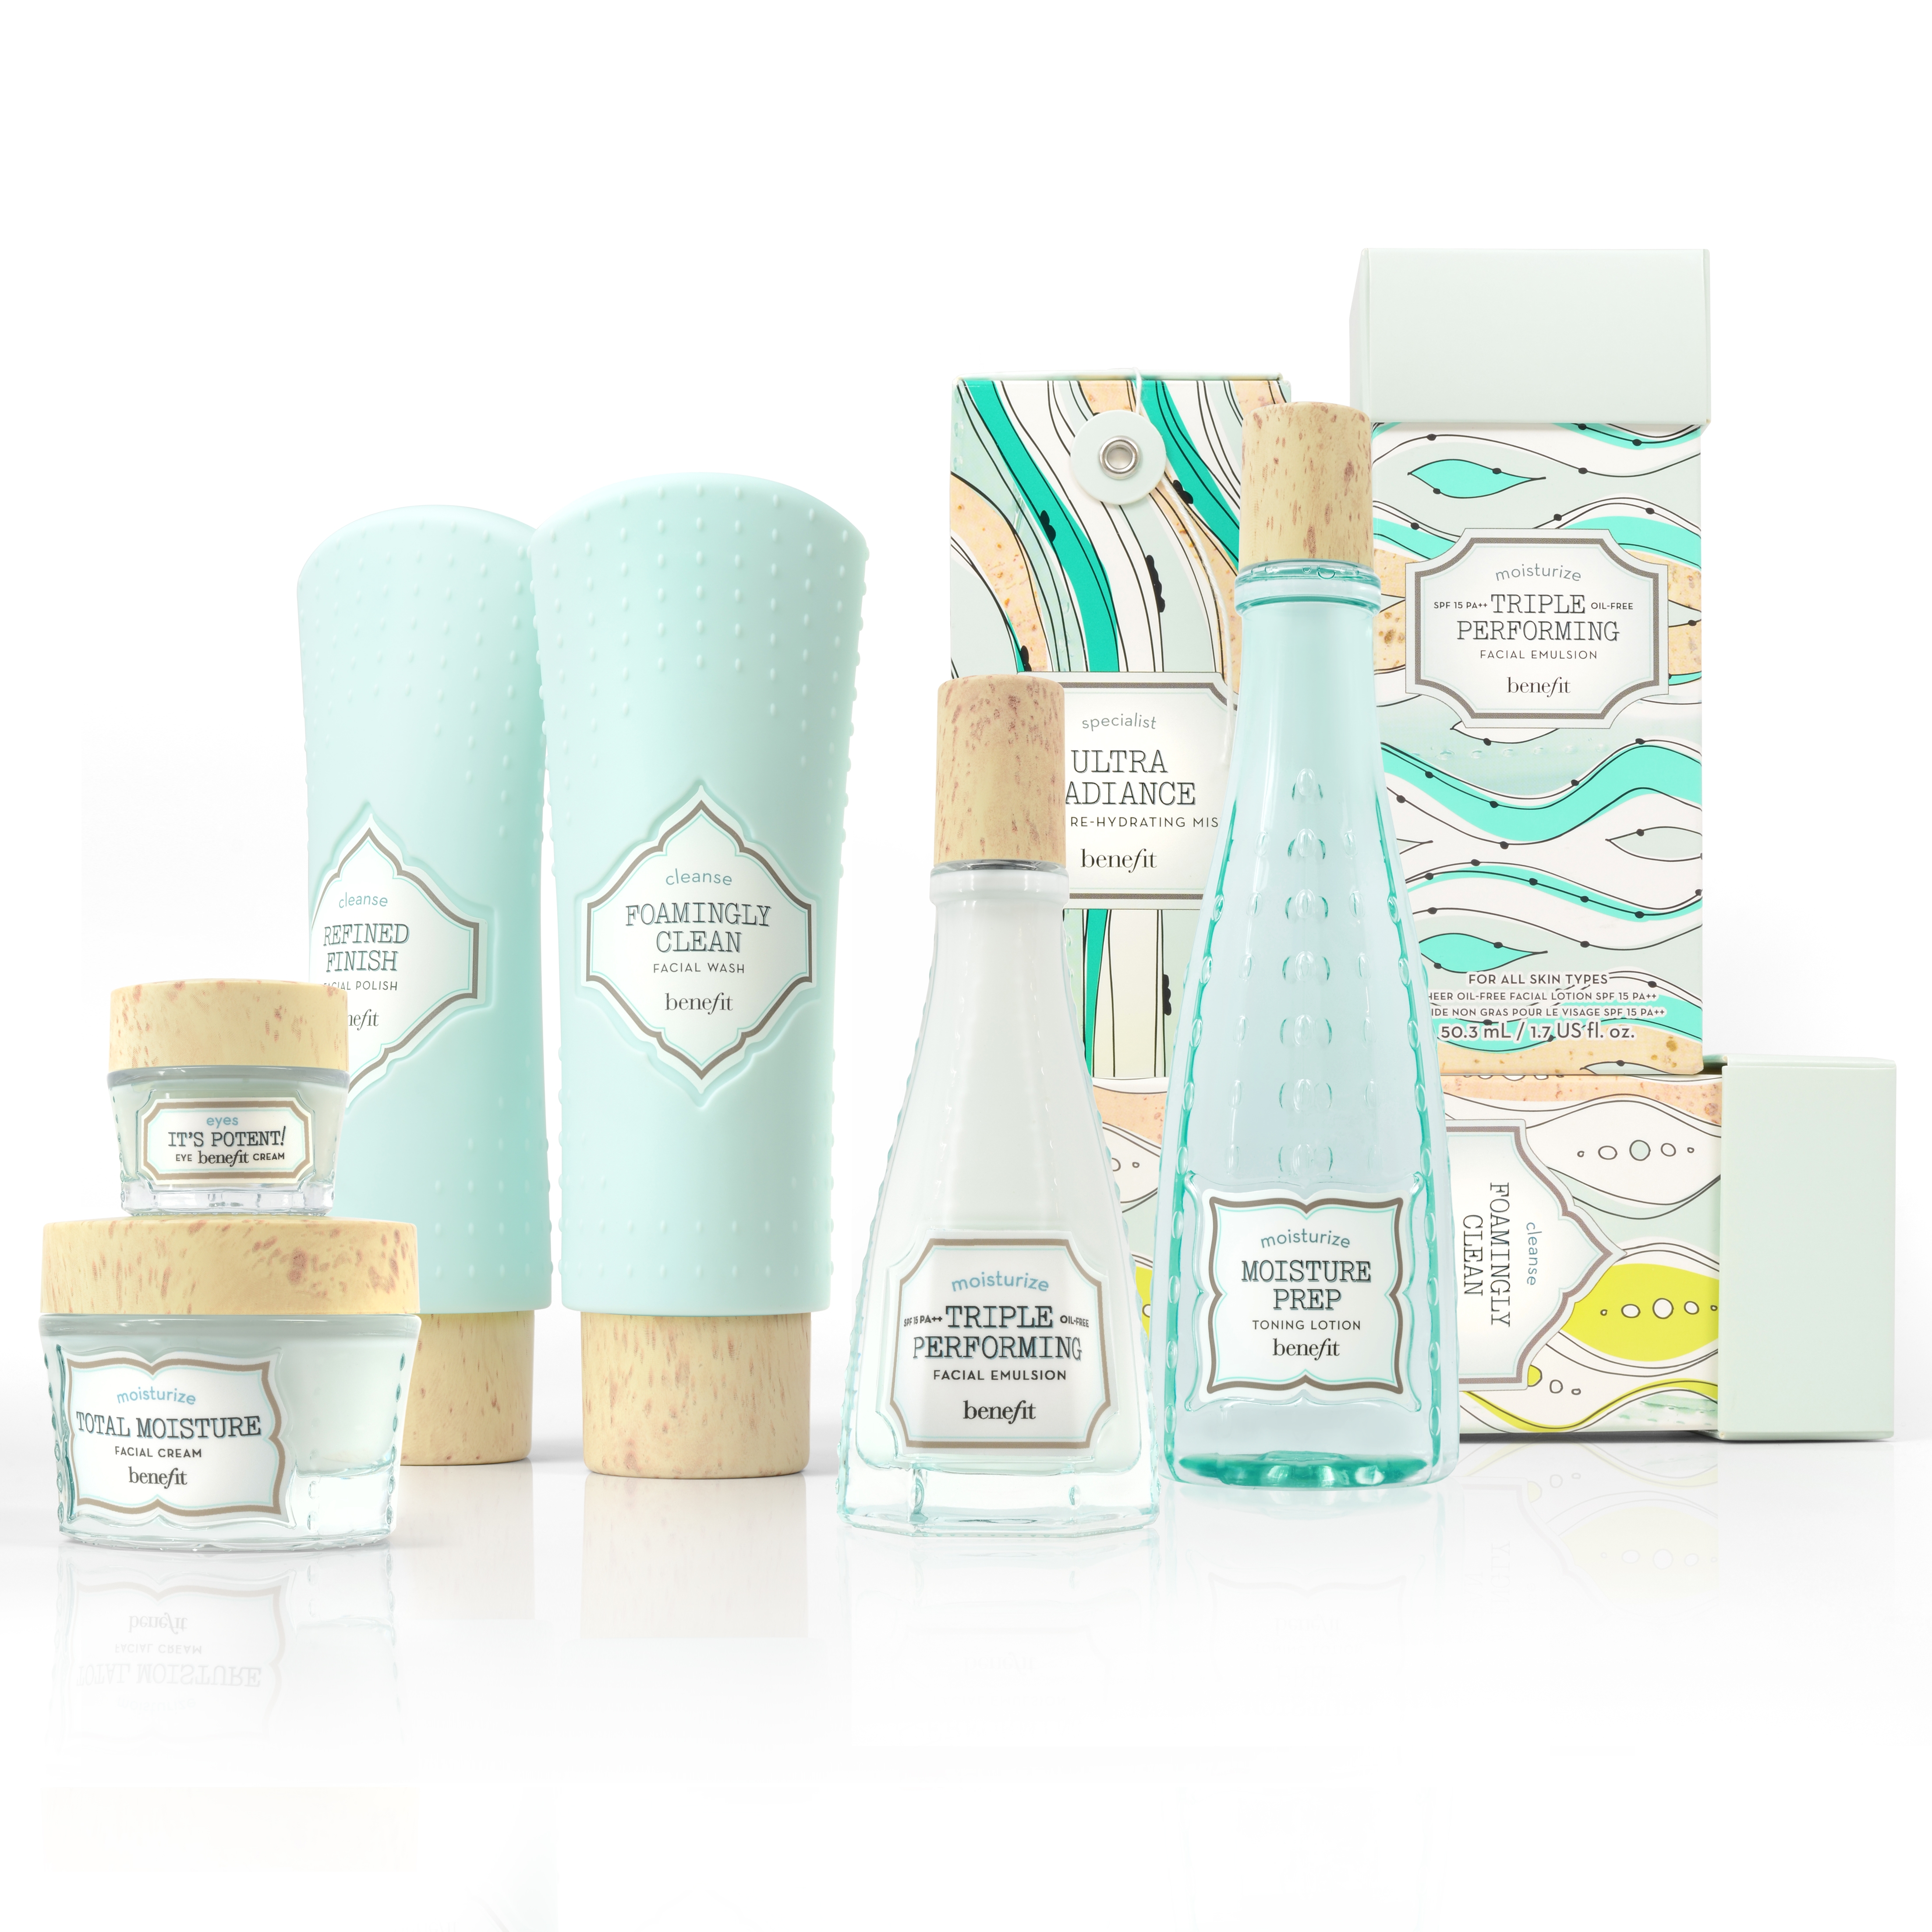 Maesa designs skincare range for Benefit inspired by 19th century